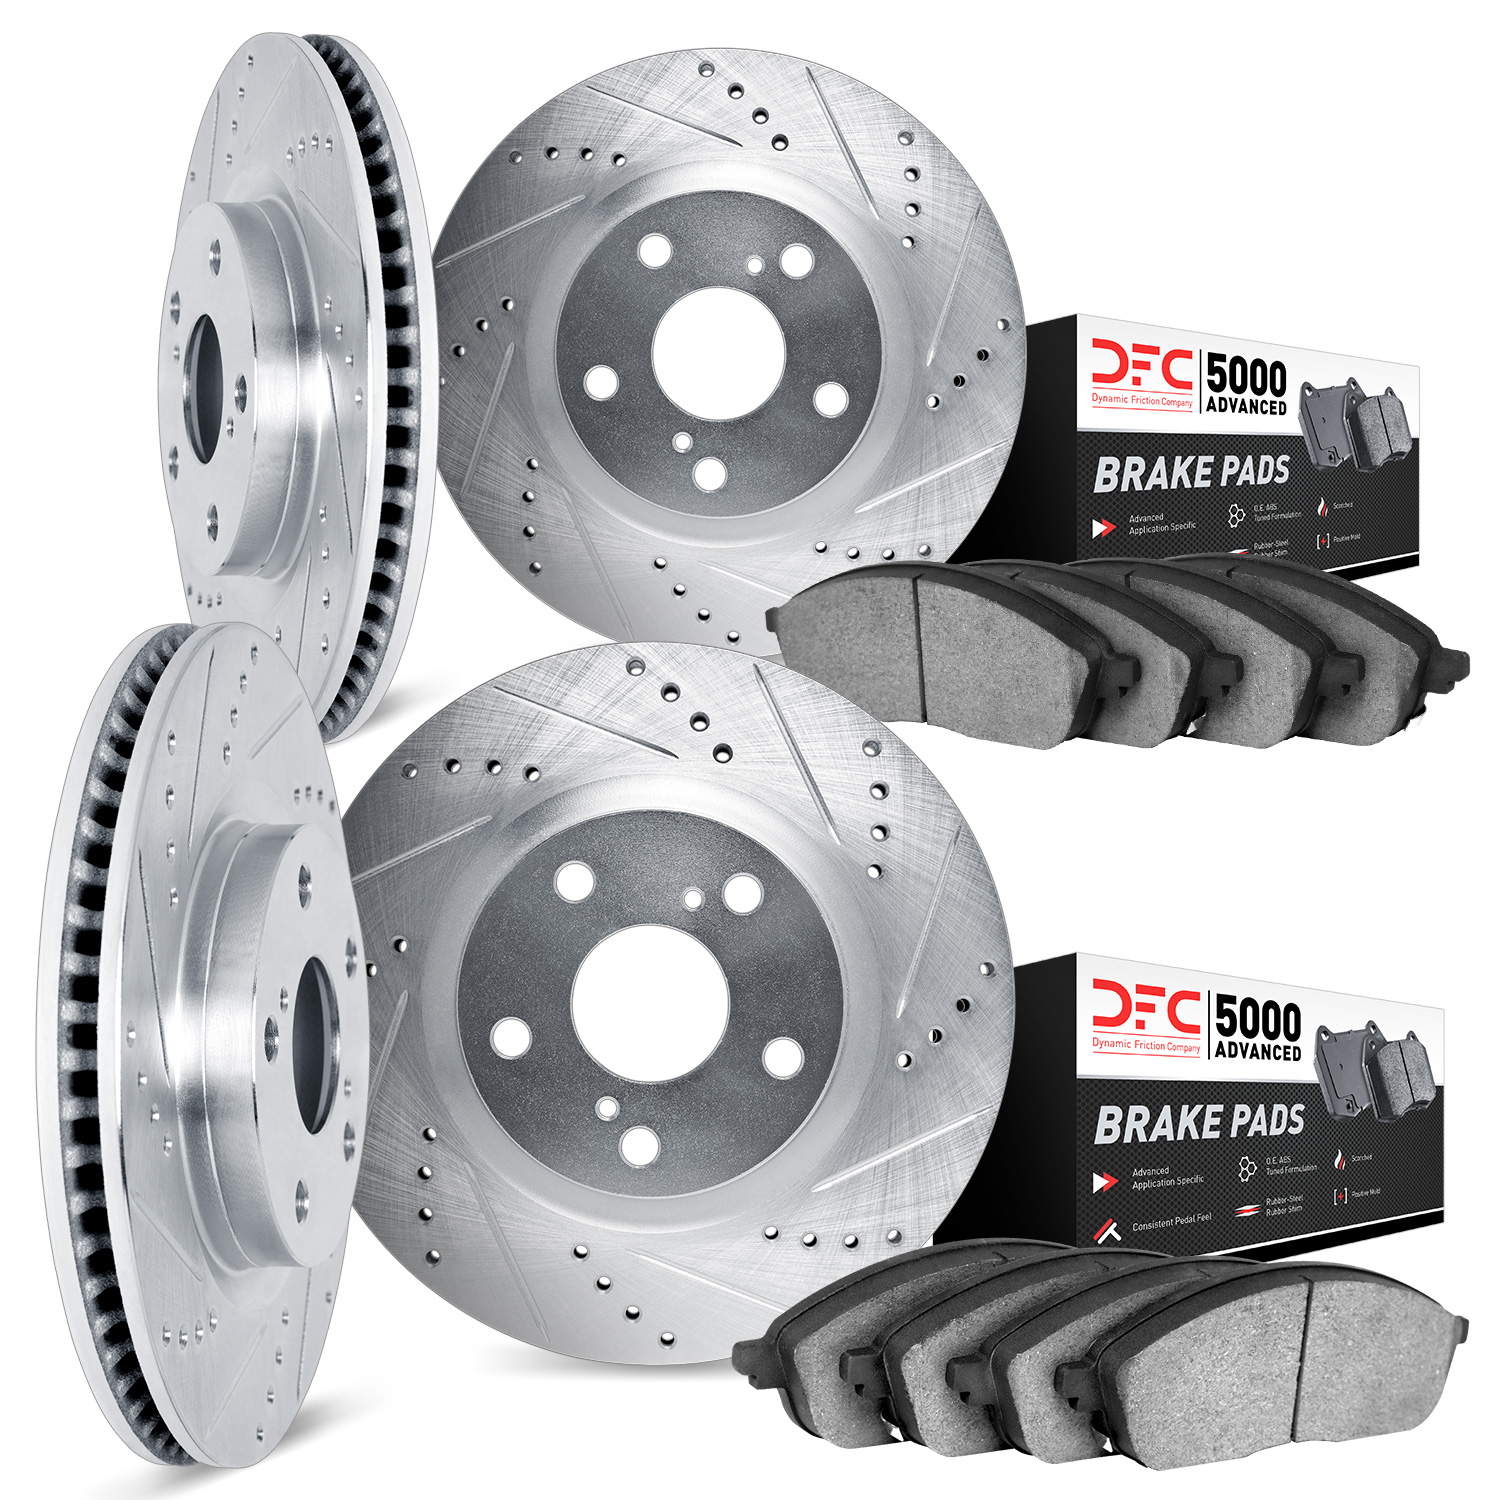 7504-72041 Drilled/Slotted Brake Rotors w/5000 Advanced Brake Pads Kit [Silver], 1992-1996 Mitsubishi, Position: Front and Rear